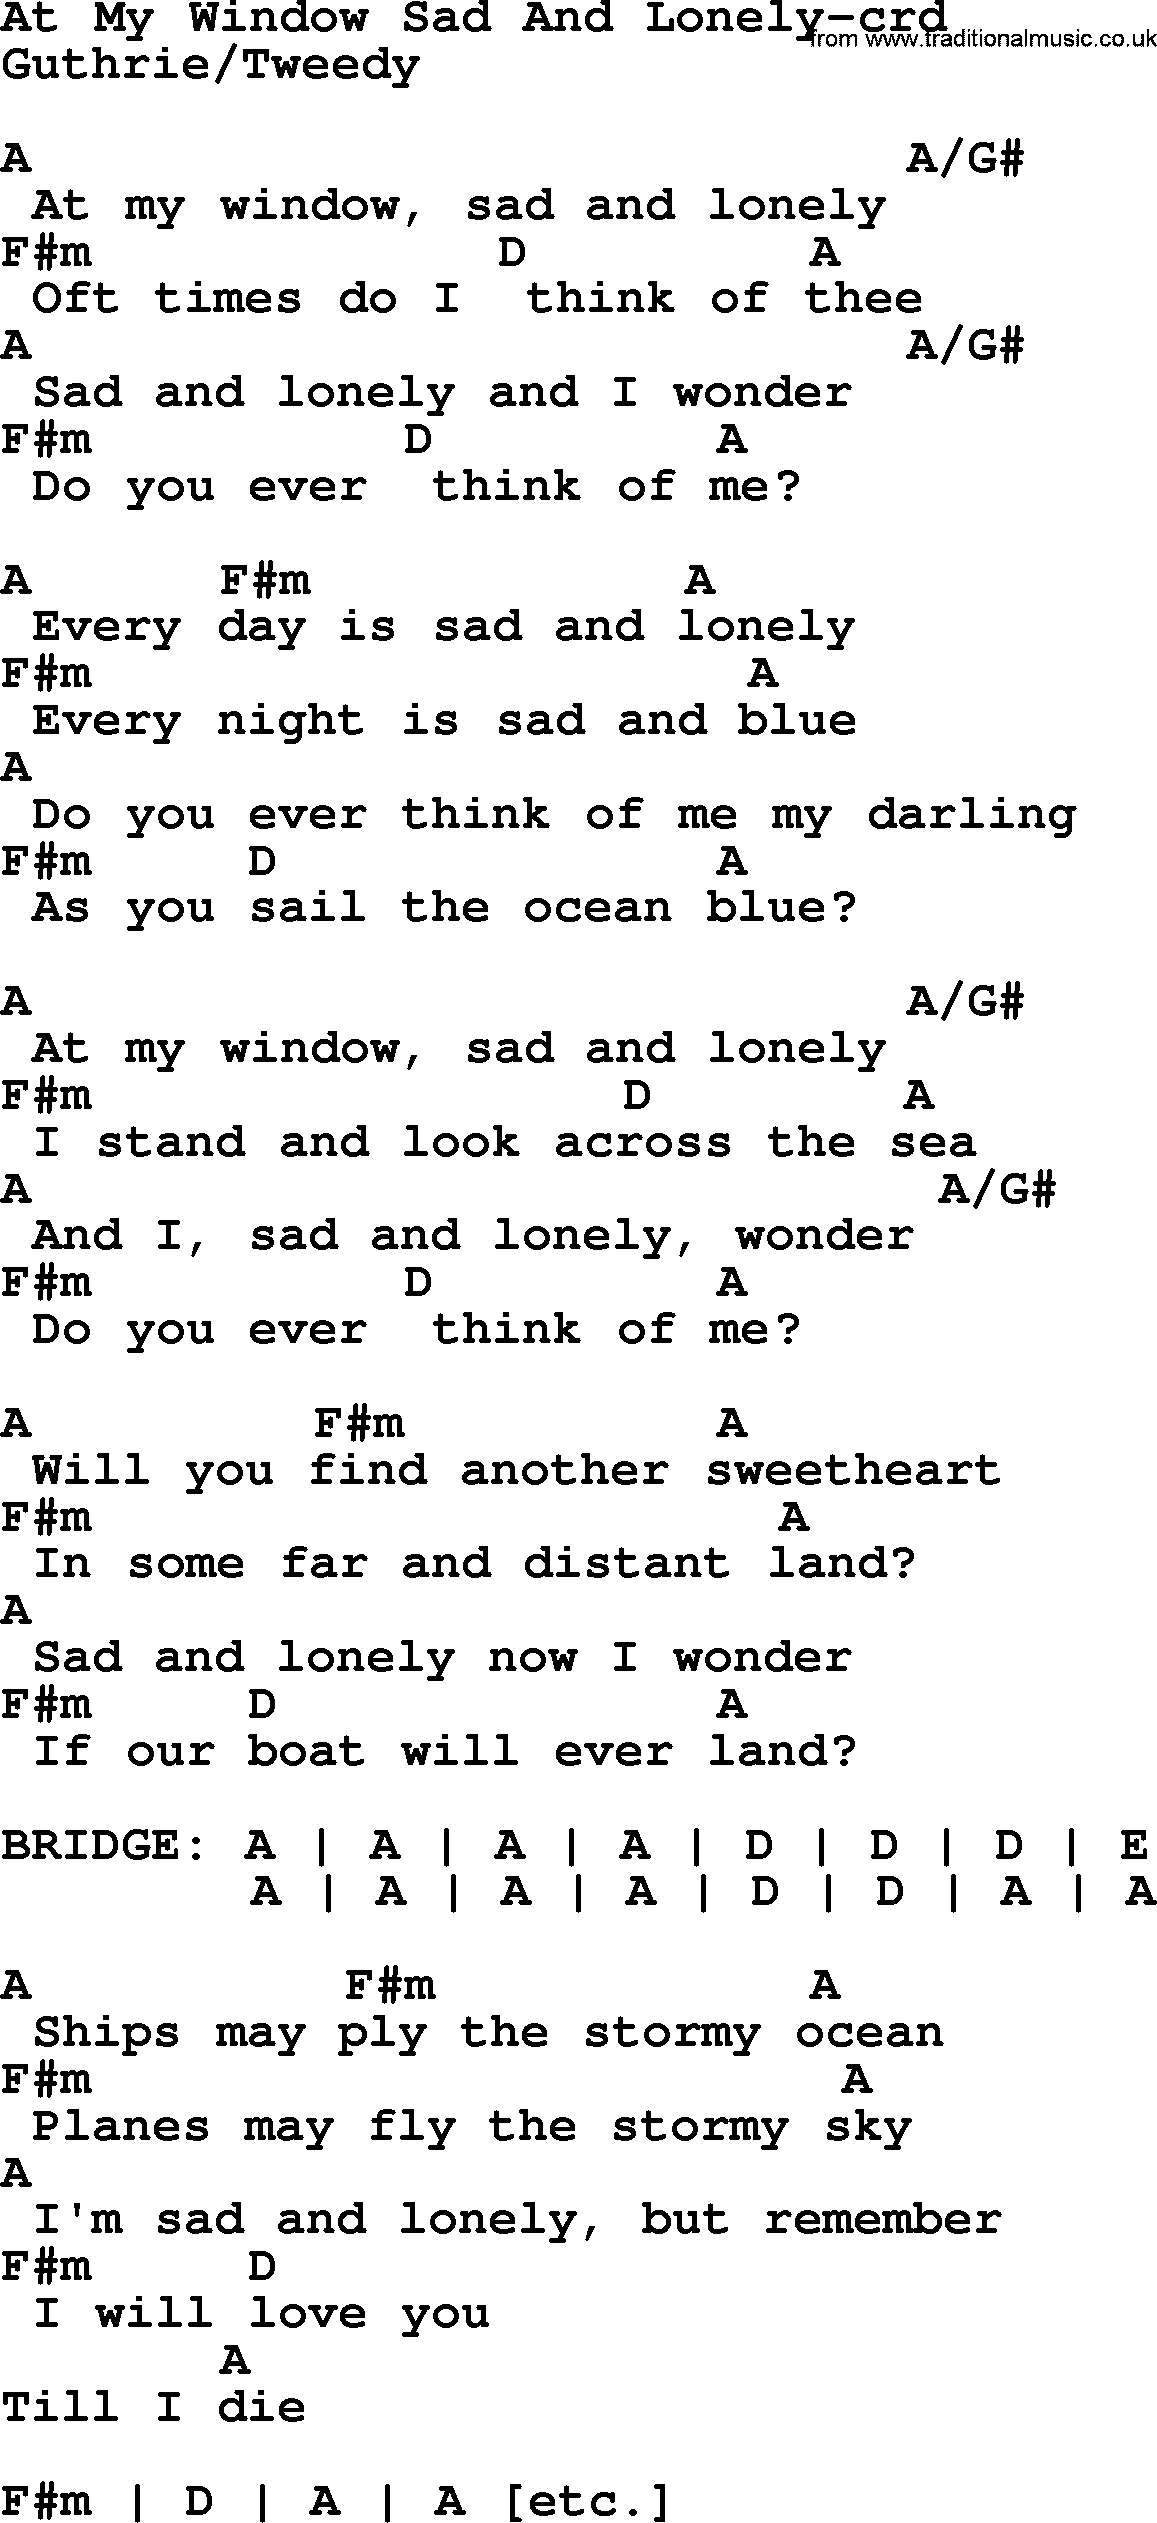 Woody Guthrie song At My Window Sad And Lonely lyrics and chords